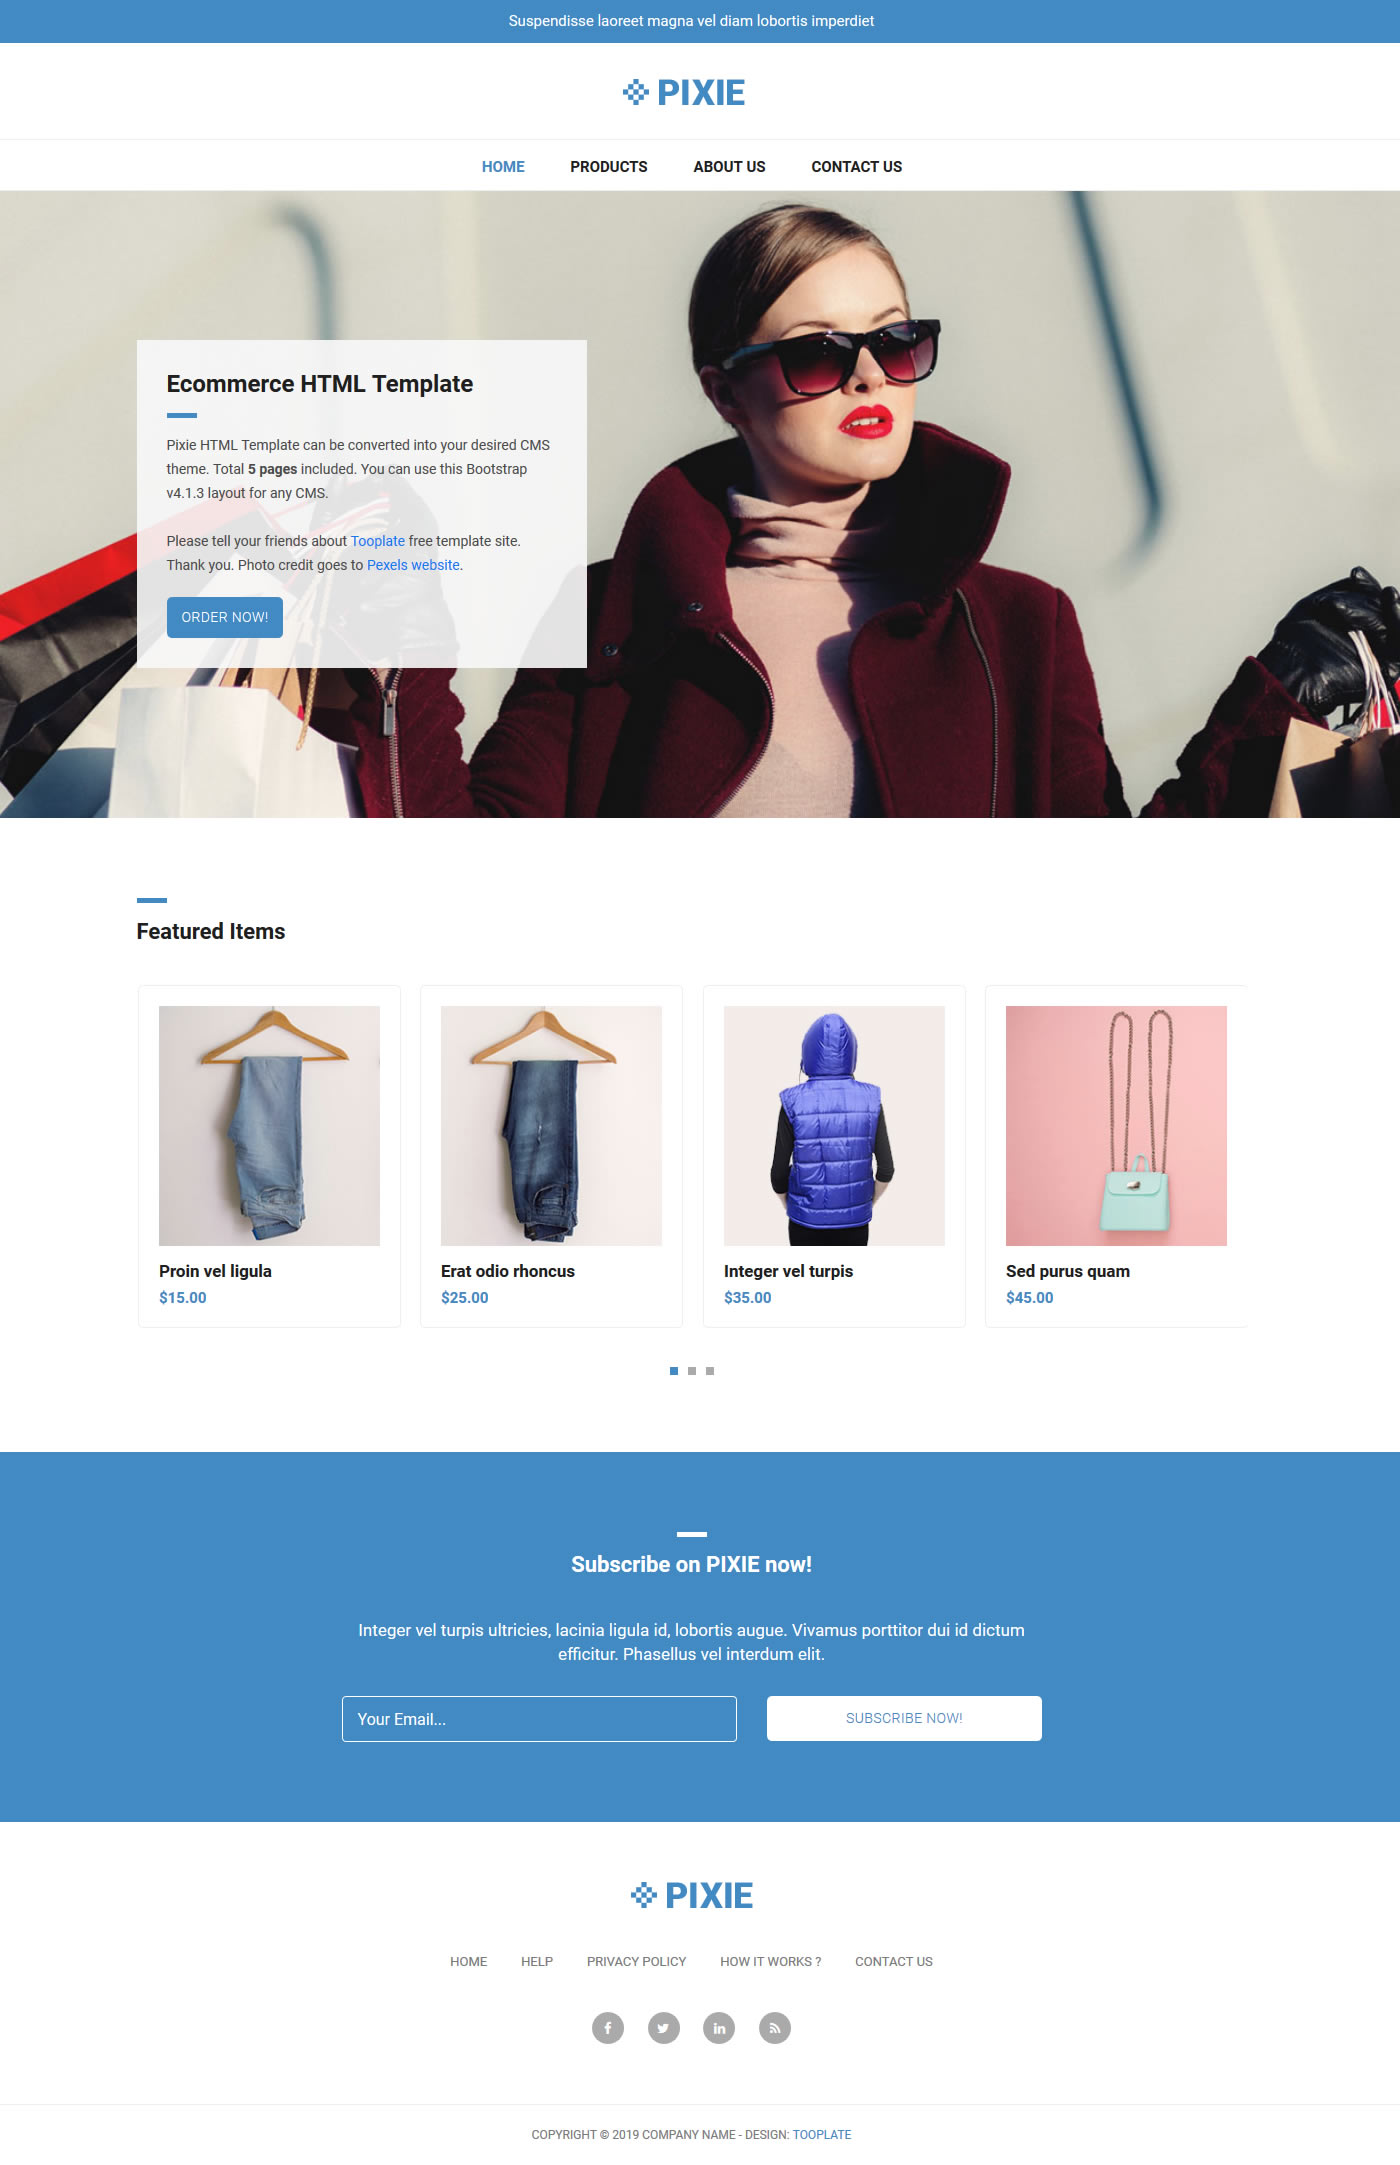 Pixie Ecommerce HTML Template